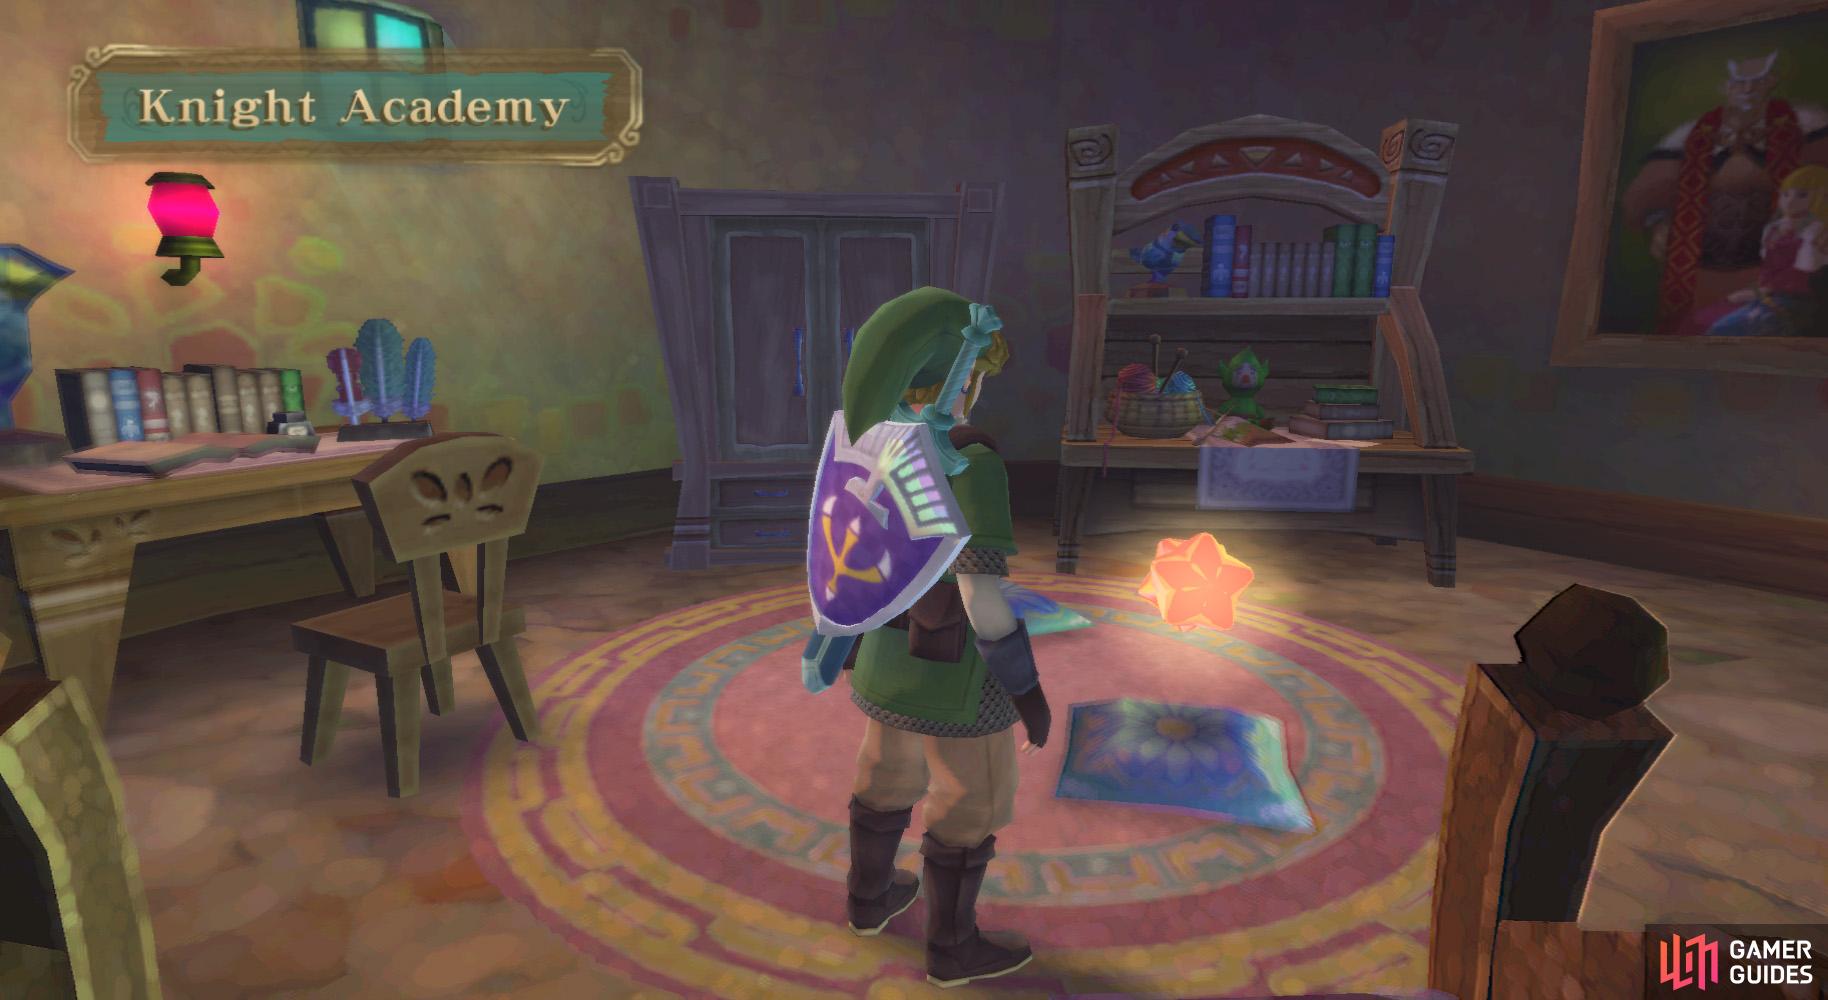 12: Inside Zelda's room in the Knight Academy. Use the Clawshots to climb into the chimney on the roof.